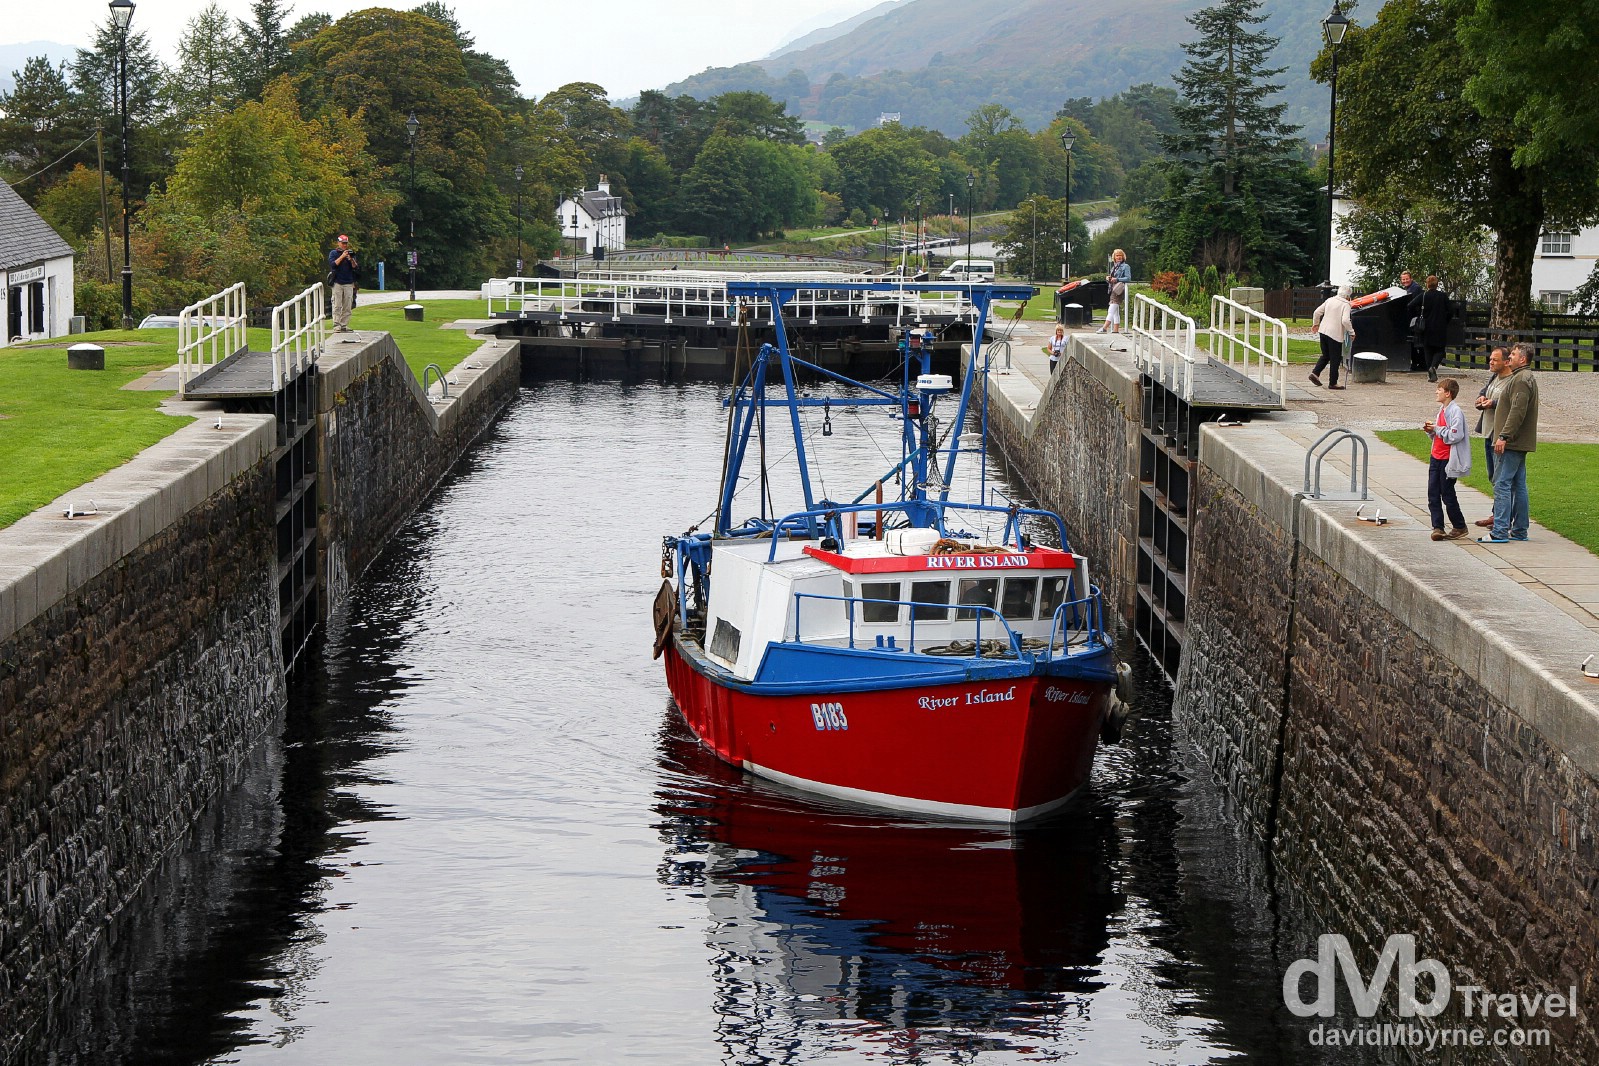 A fishing boat navigating the Neptune's Staircase lock of the Caledonian Canal in Banavie, Scotland. September 18, 2014.